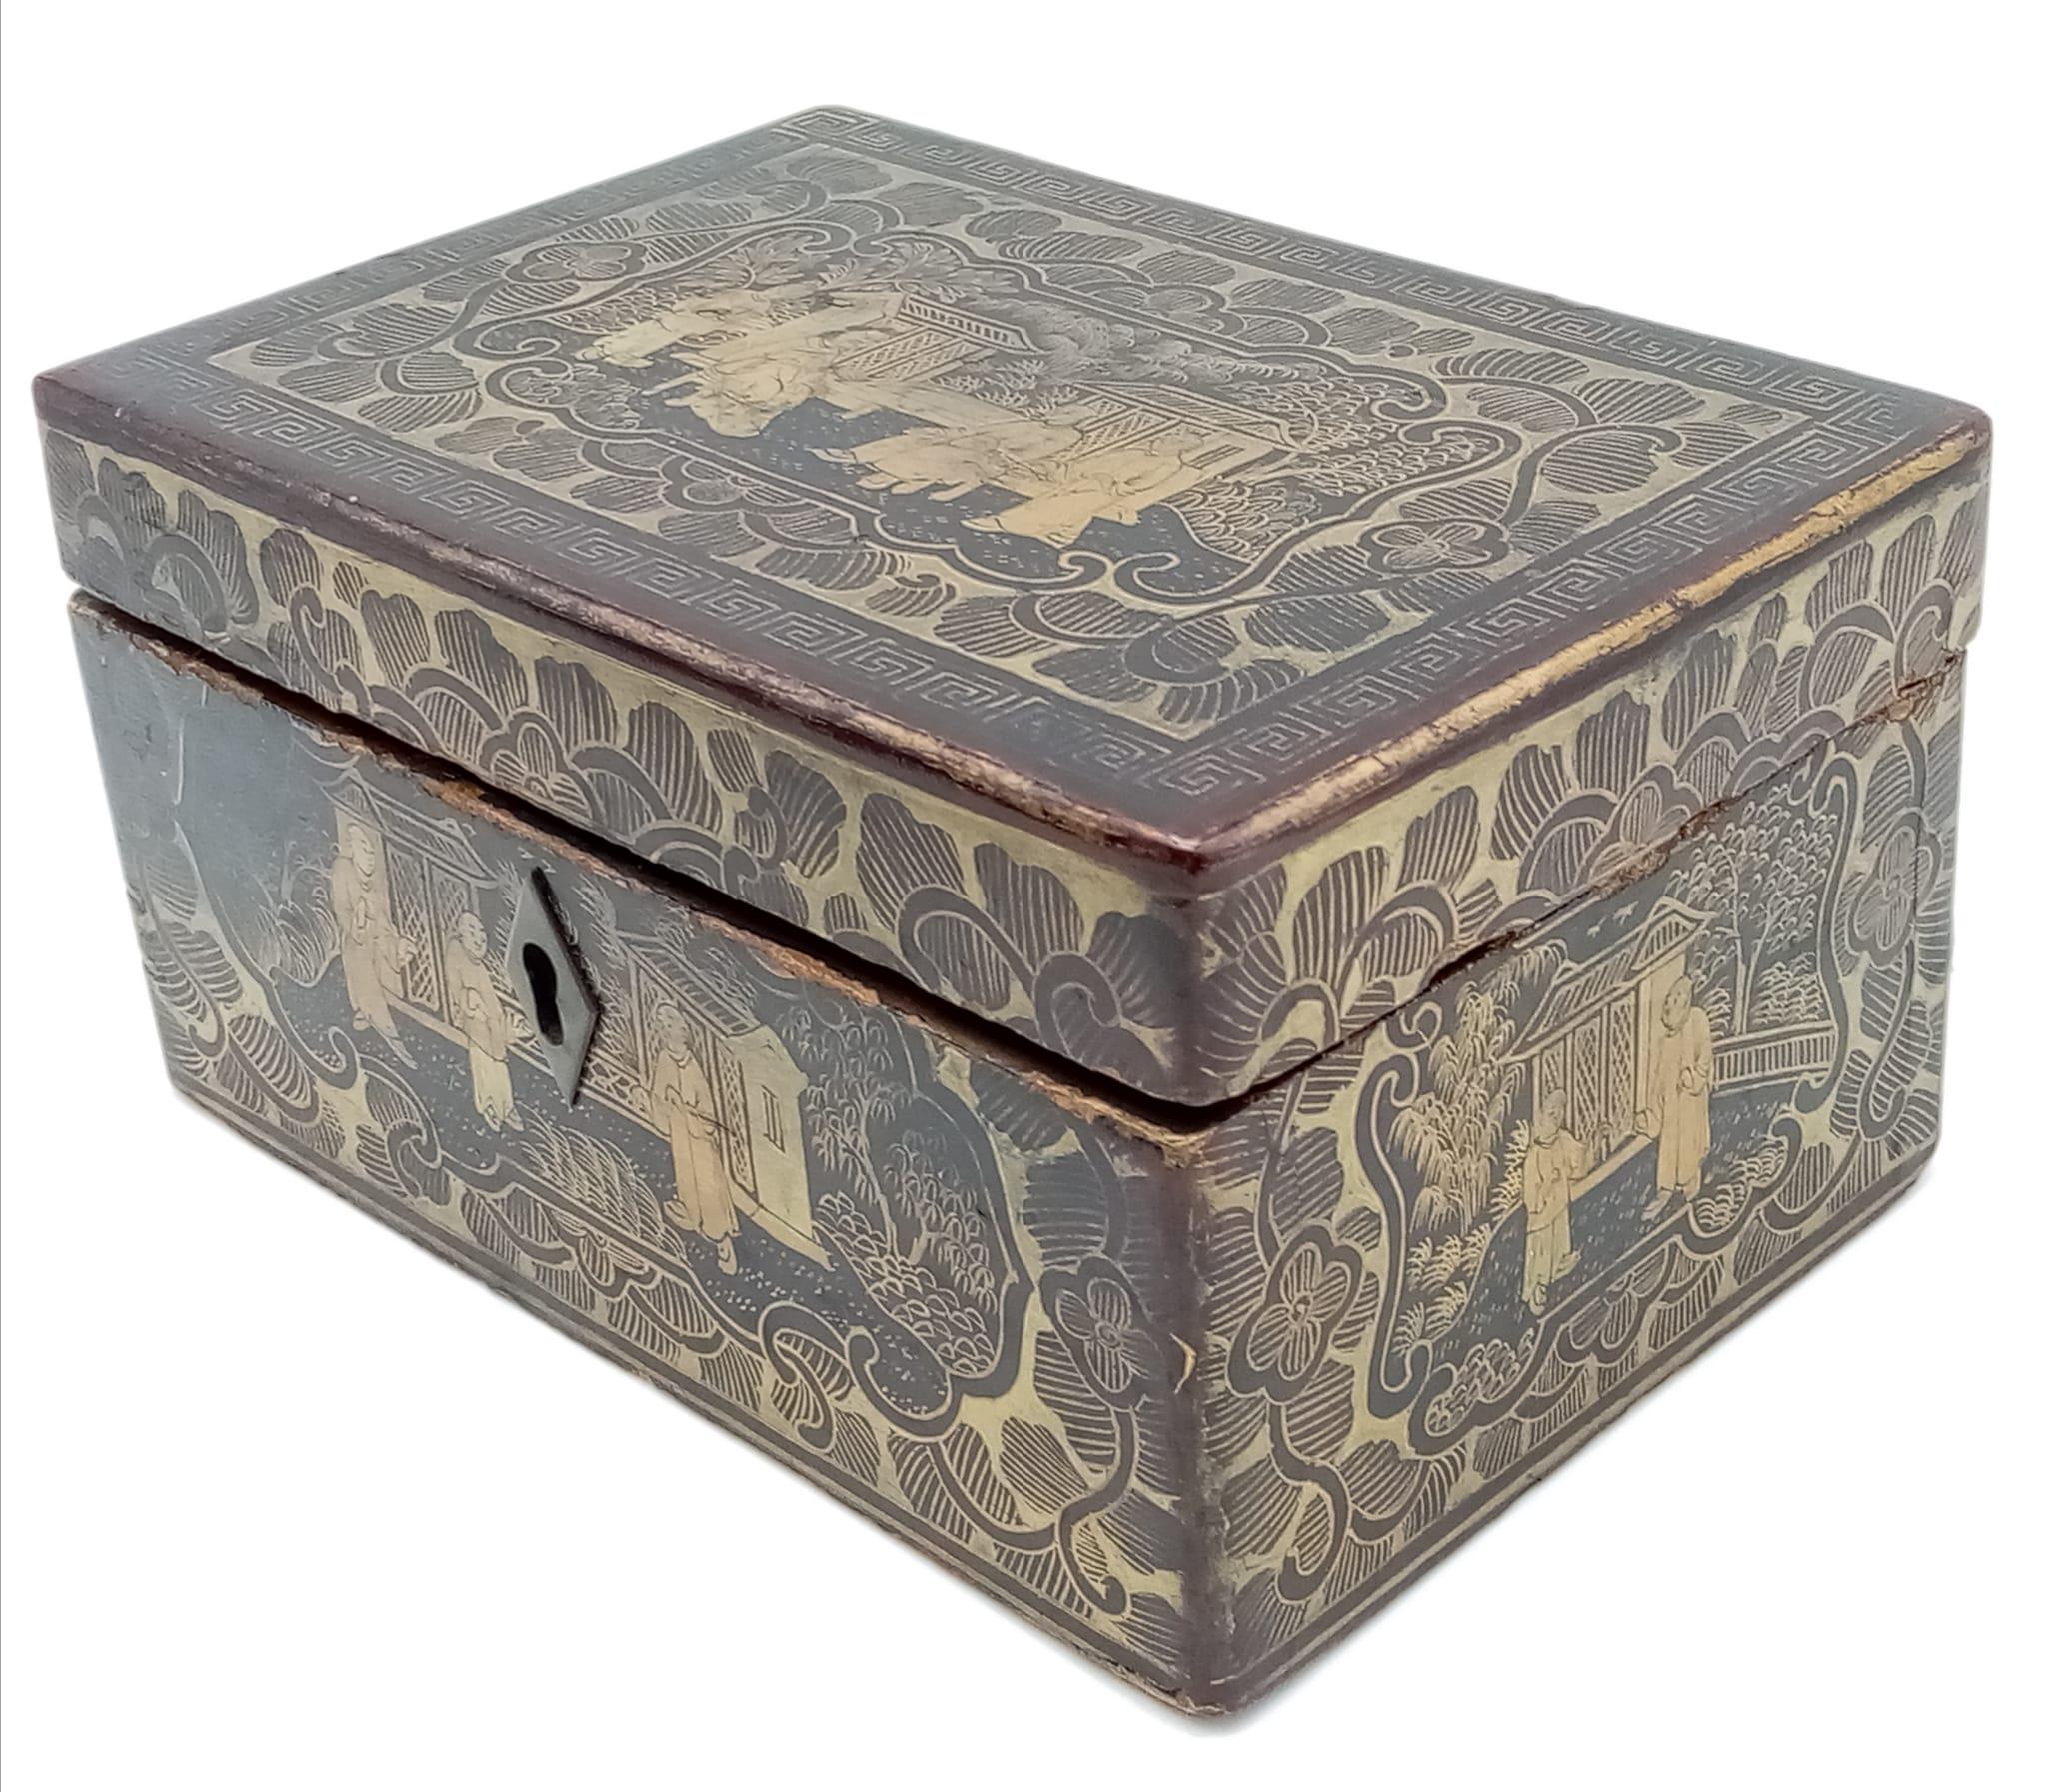 An Antique, Late 18th Century Chinese Lacquer Tea Caddy/Jewellery Box. Wonderful gilding depicting - Image 3 of 7